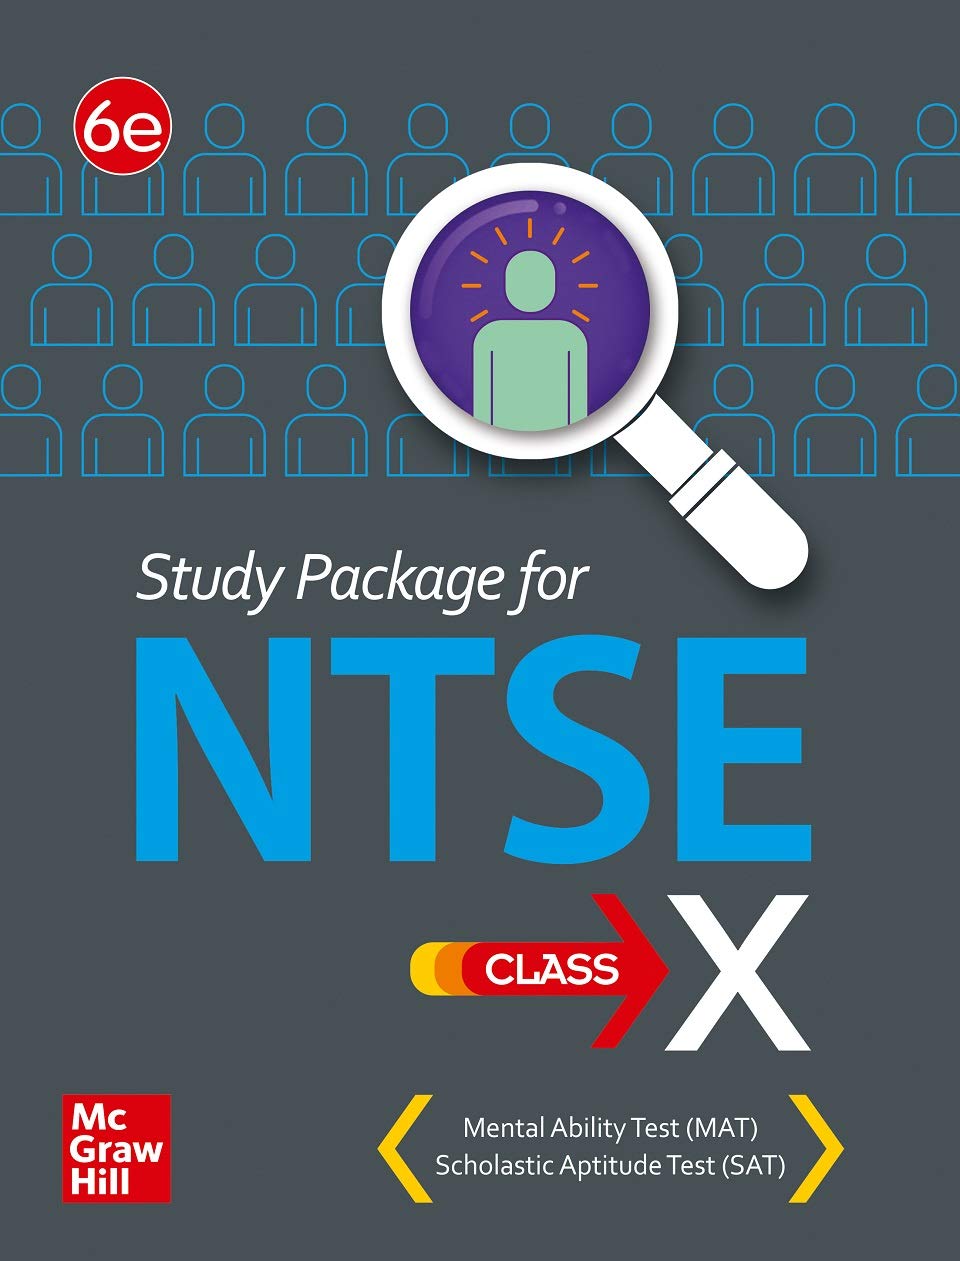 NTSE Class X  6th Edition For MAT and SAT